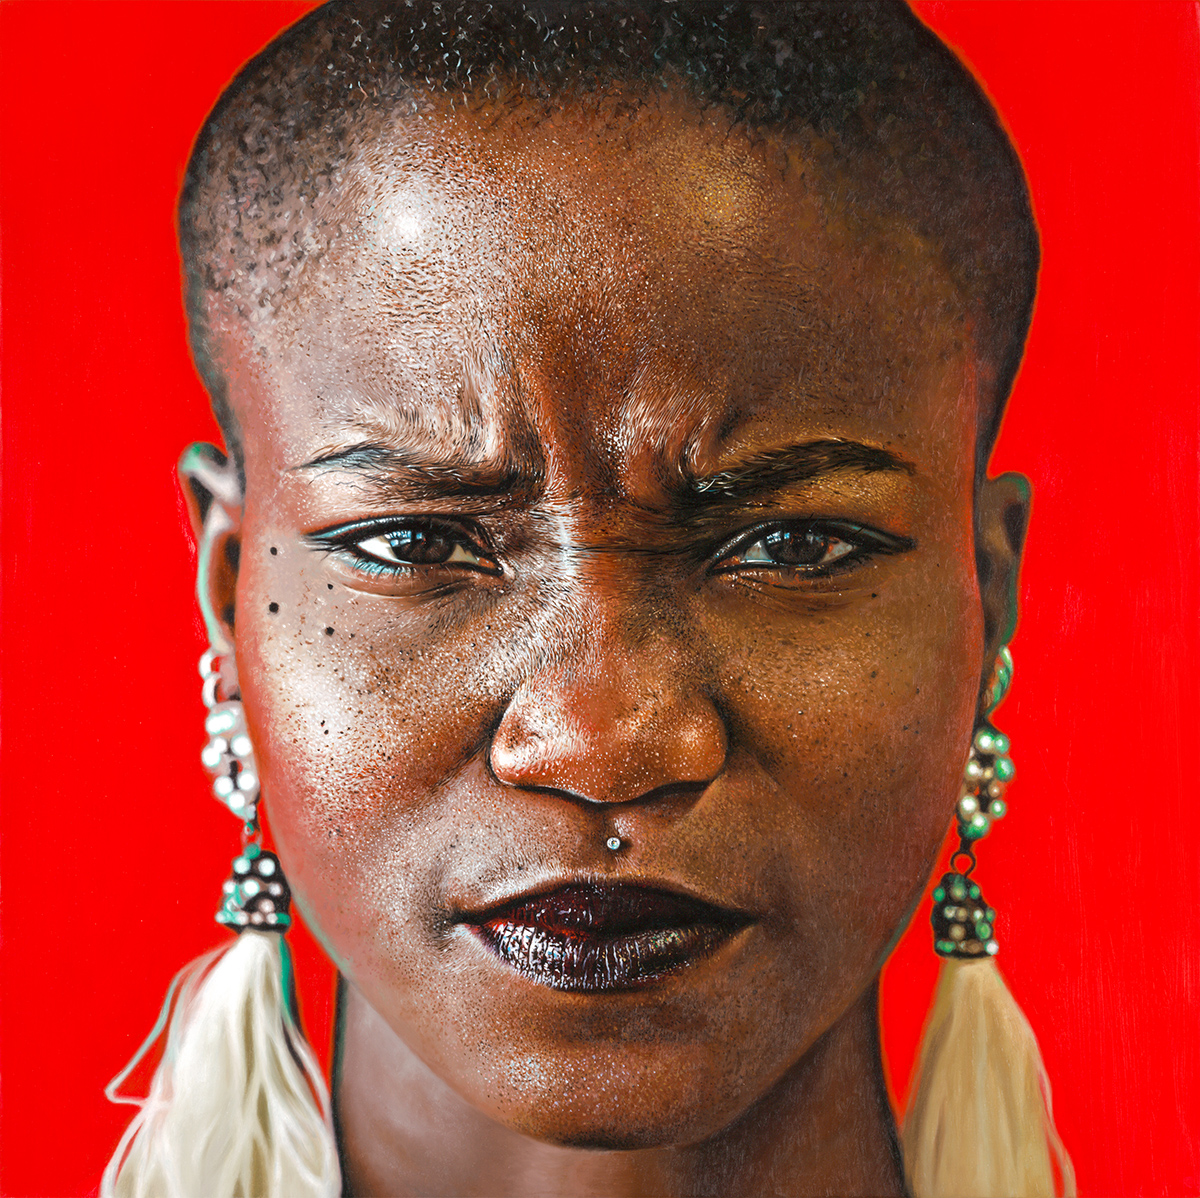 oil painting of a realistic face of a woman with her eyebrows narrowed, and eyes locked on the viewer. Wearing long flow-y earrings. Red background 